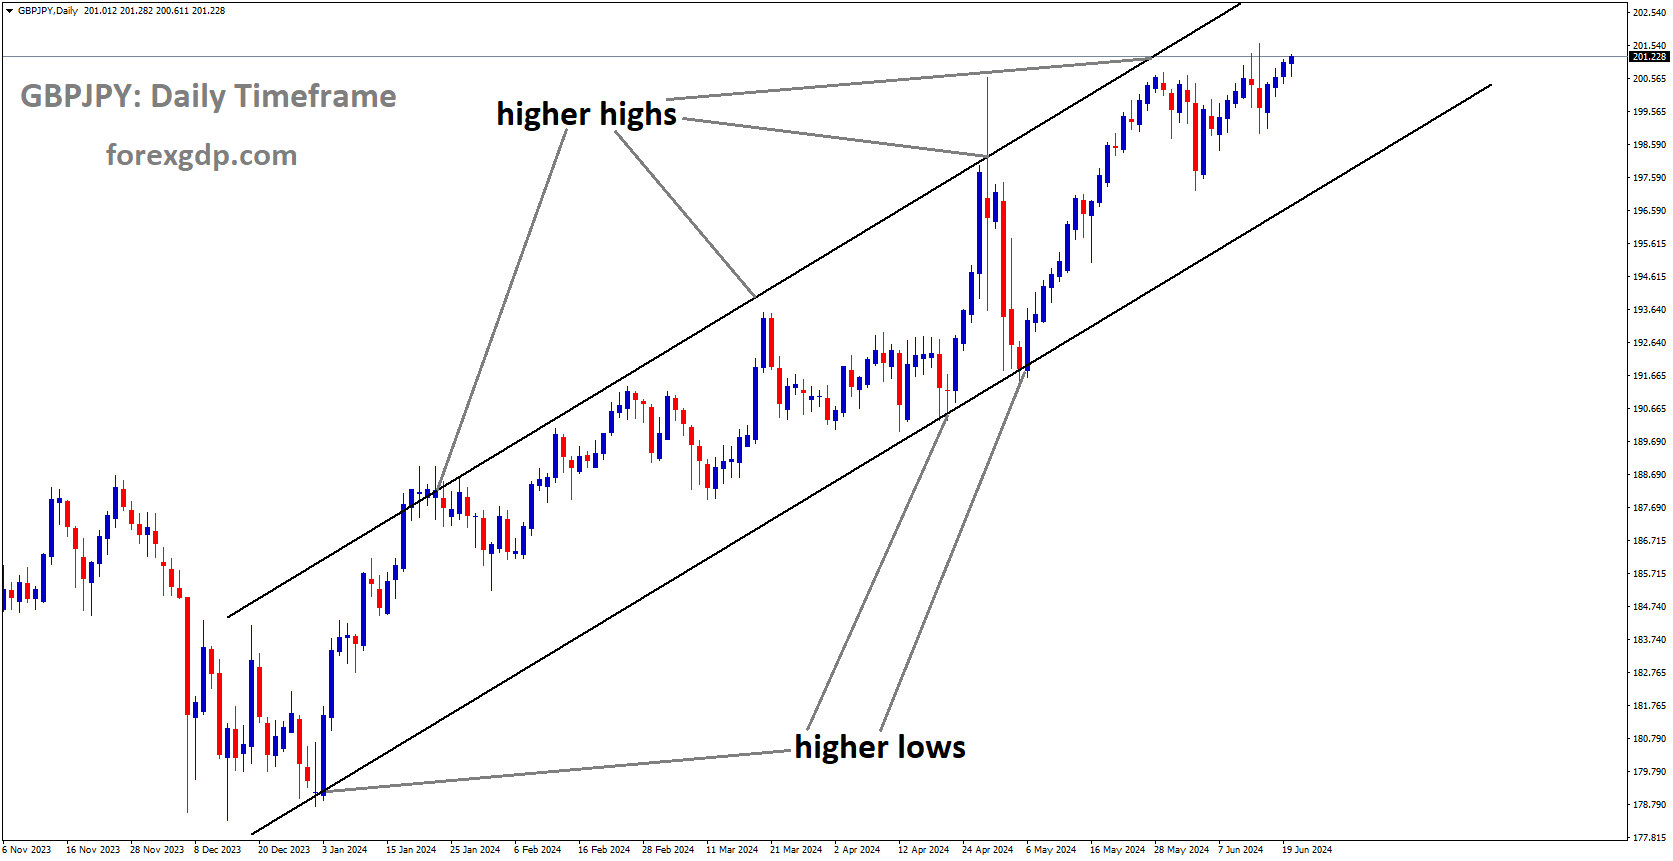 GBPJPY is moving in Ascending channel and market has fallen from the higher high area of the channel